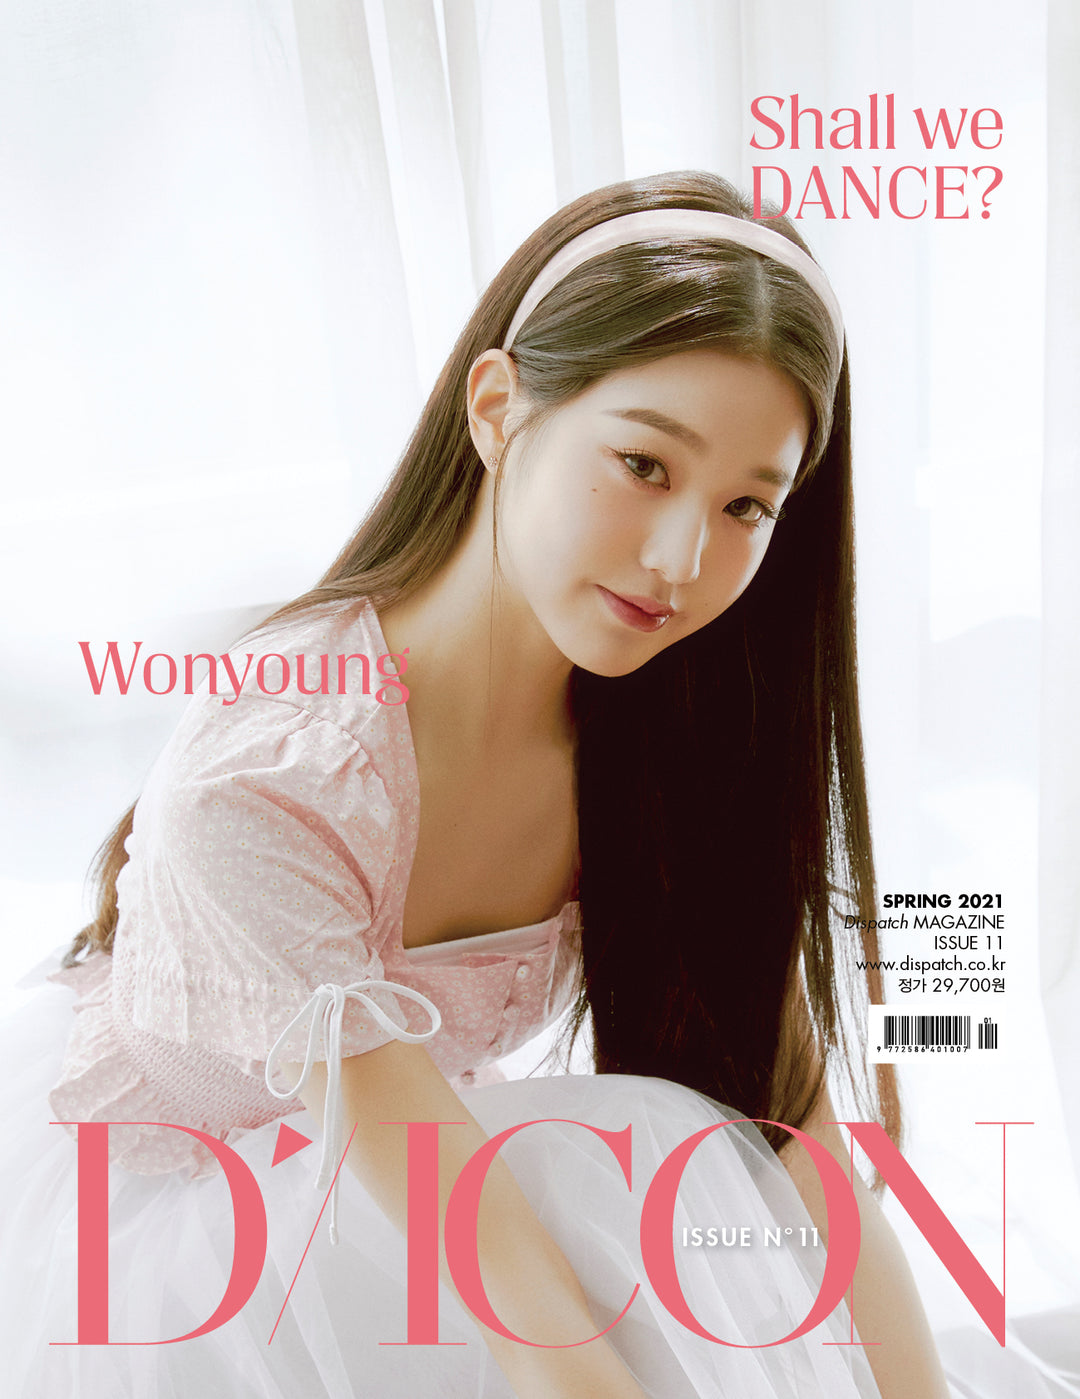 DICON ISSUE N°11 : SHALL WE DANCE A-type